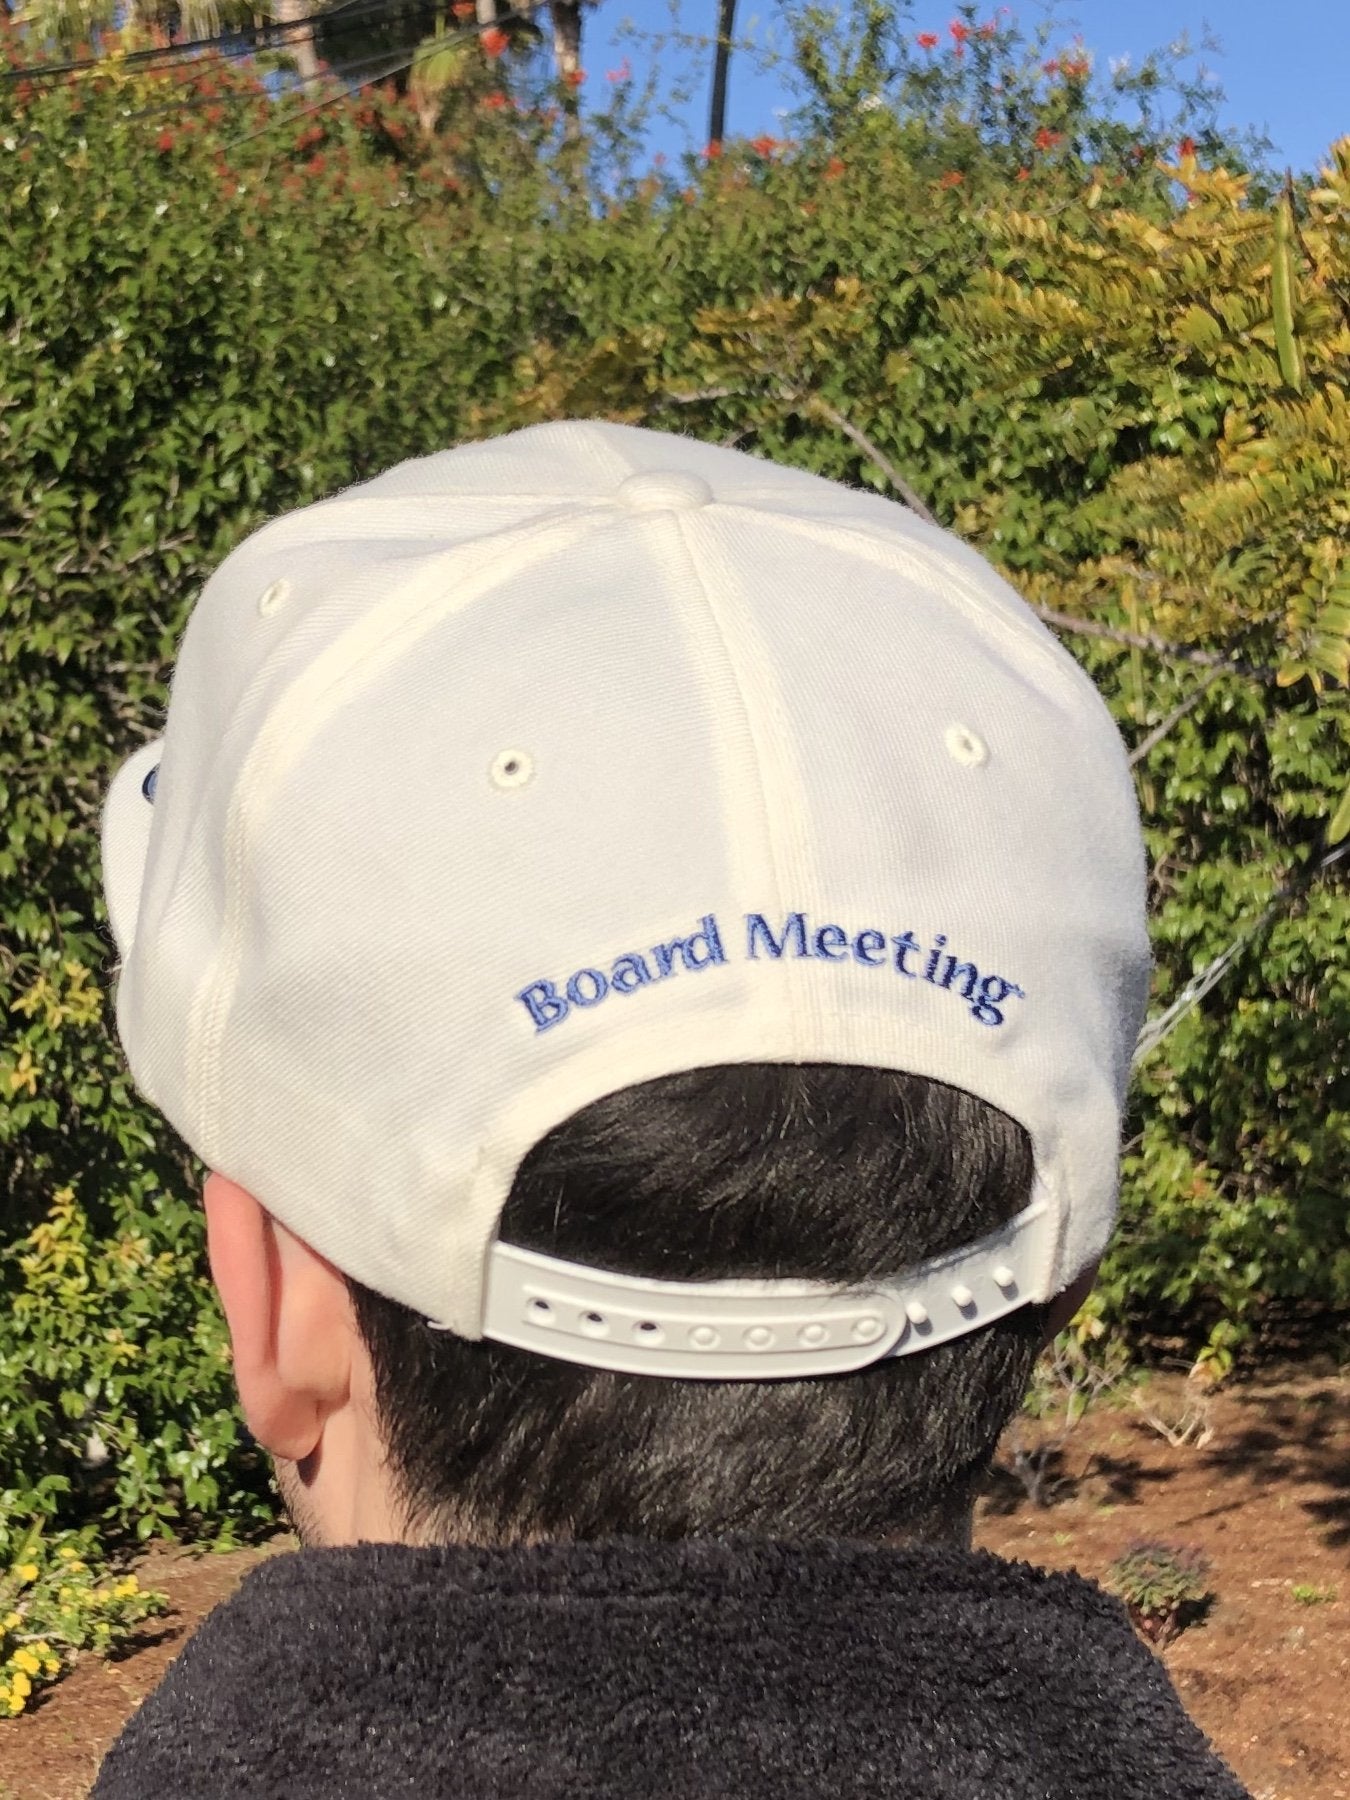 Board Meeting snap back hat surfing